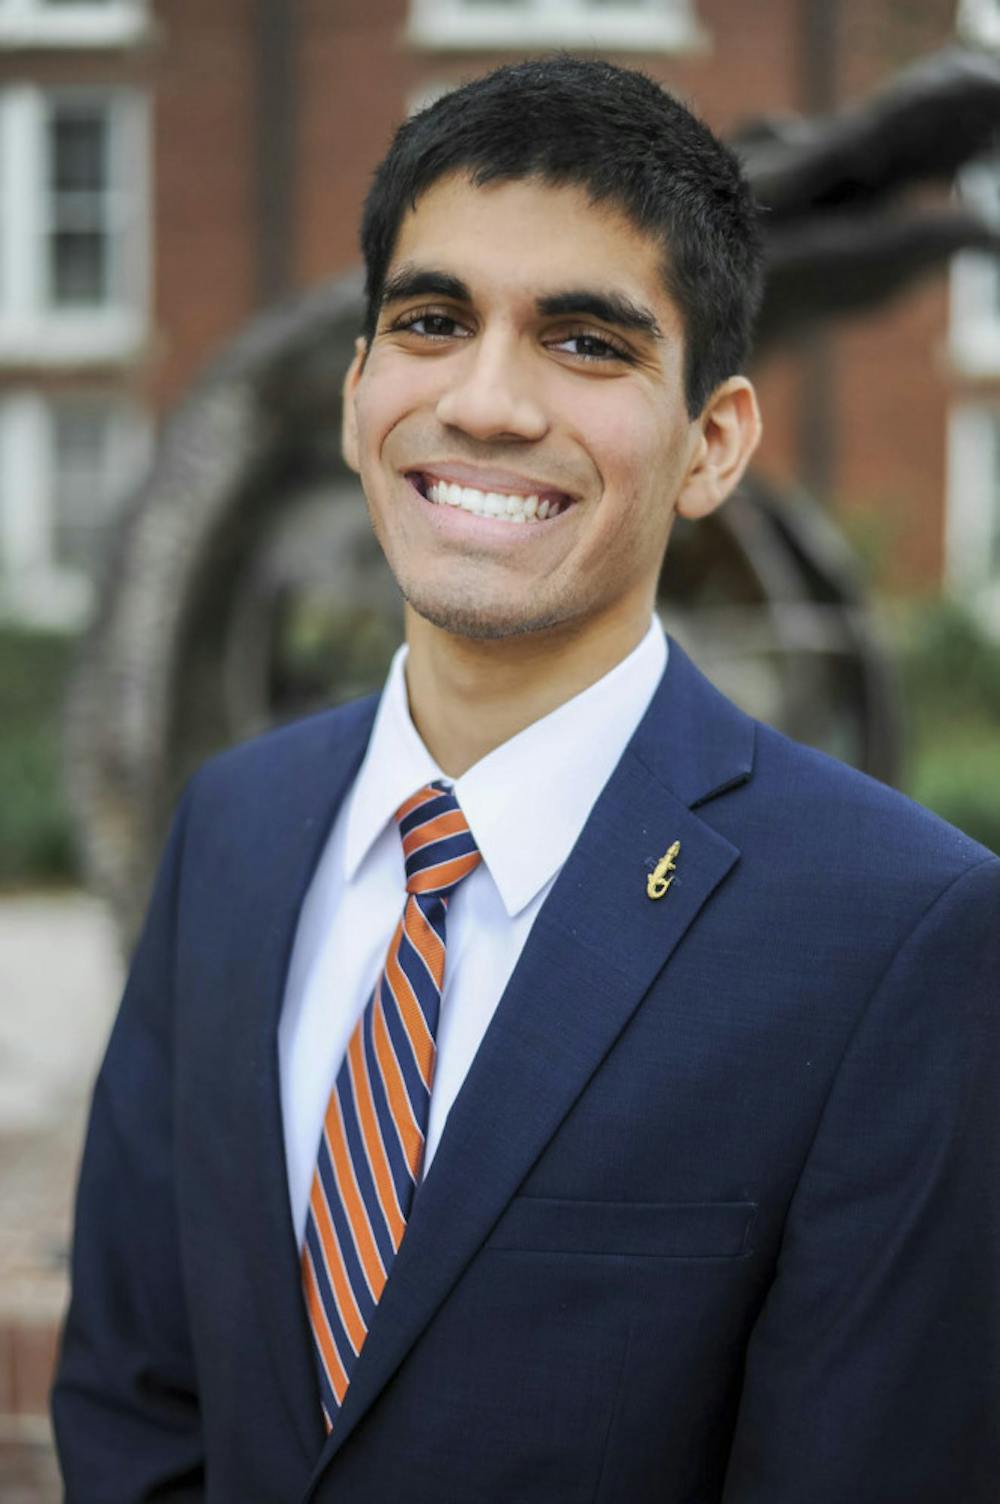 <p>Kishan Patel is a 20-year-old UF industrial and systems engineering sophomore running for Student Body treasurer with Impact Party.</p><p>Patel is currently a sophomore senator. He serves as the Indian Student Association treasurer and as a member of the Budget and Appropriations Committee in SG. He was a member of GatoRaas Dance Team and is currently a resident assistant in Cypress Hall. He was also the Access Party treasurer.</p><p>Patel said he decided to run with Impact because he said Access Party was unable to compromise in Senate.</p><p>“I’m really moving toward tangible change for the students,” he said. “The Impact Party is all about tangible change.”</p>